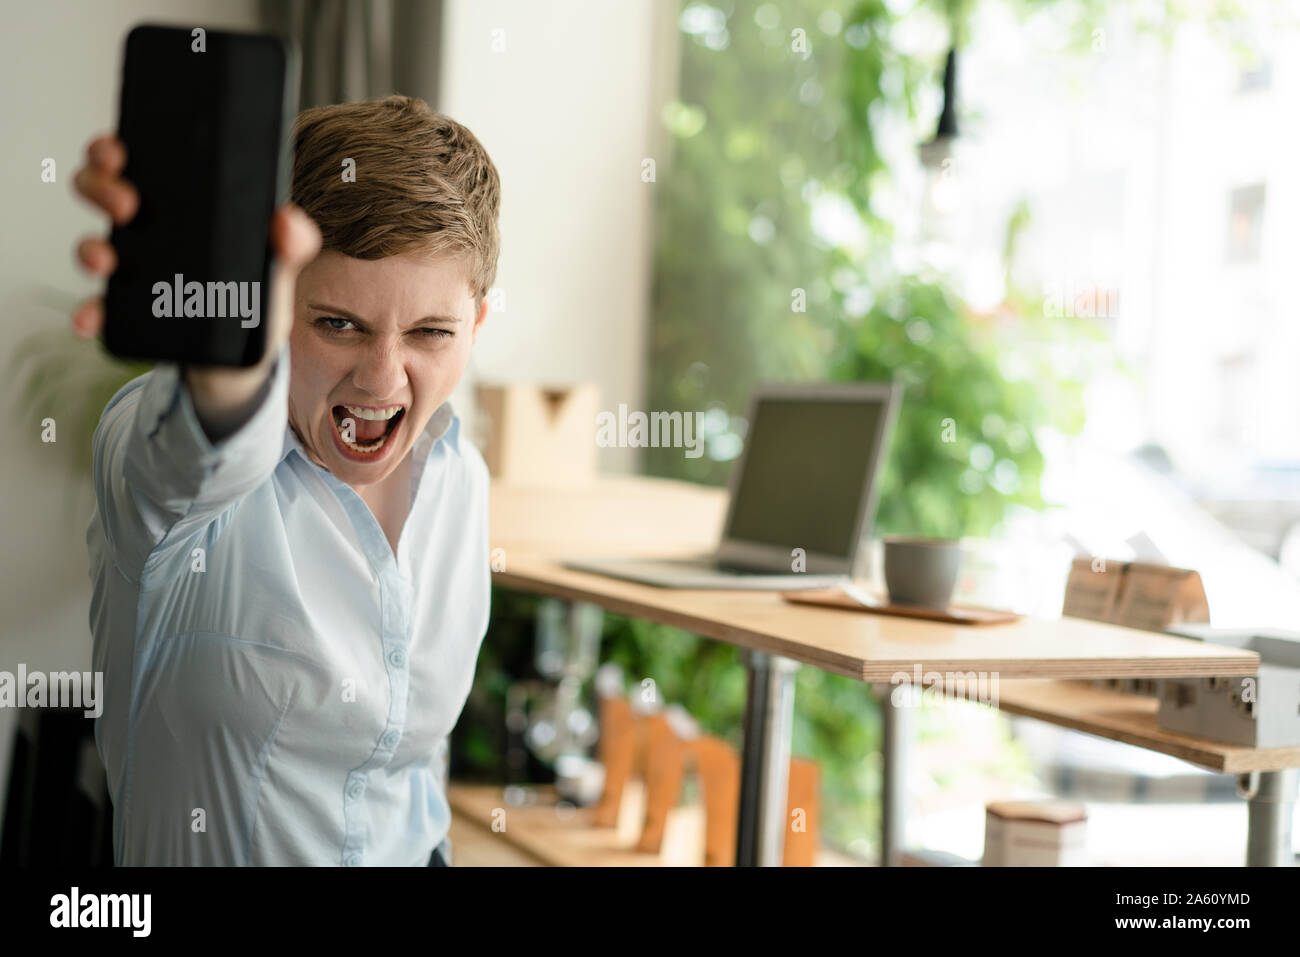 Portrait of screaming businesswoman holding cell phone in a cafe Stock Photo